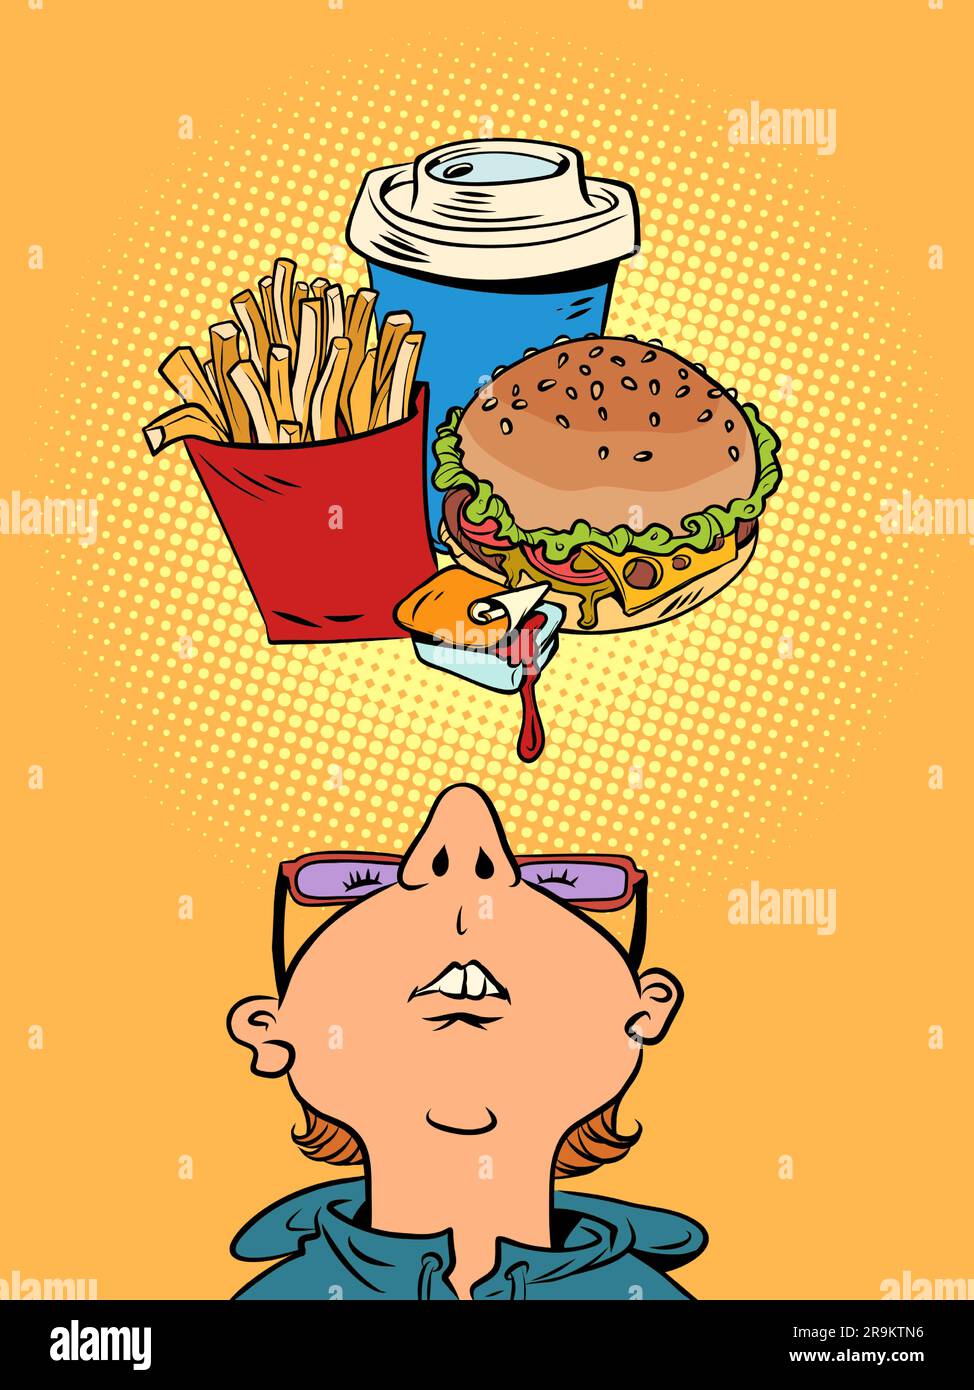 Thinking about delivering delicious fast food to your home. Bad food for our health, and we still want it. A man with glasses looks up, and there are Stock Vector